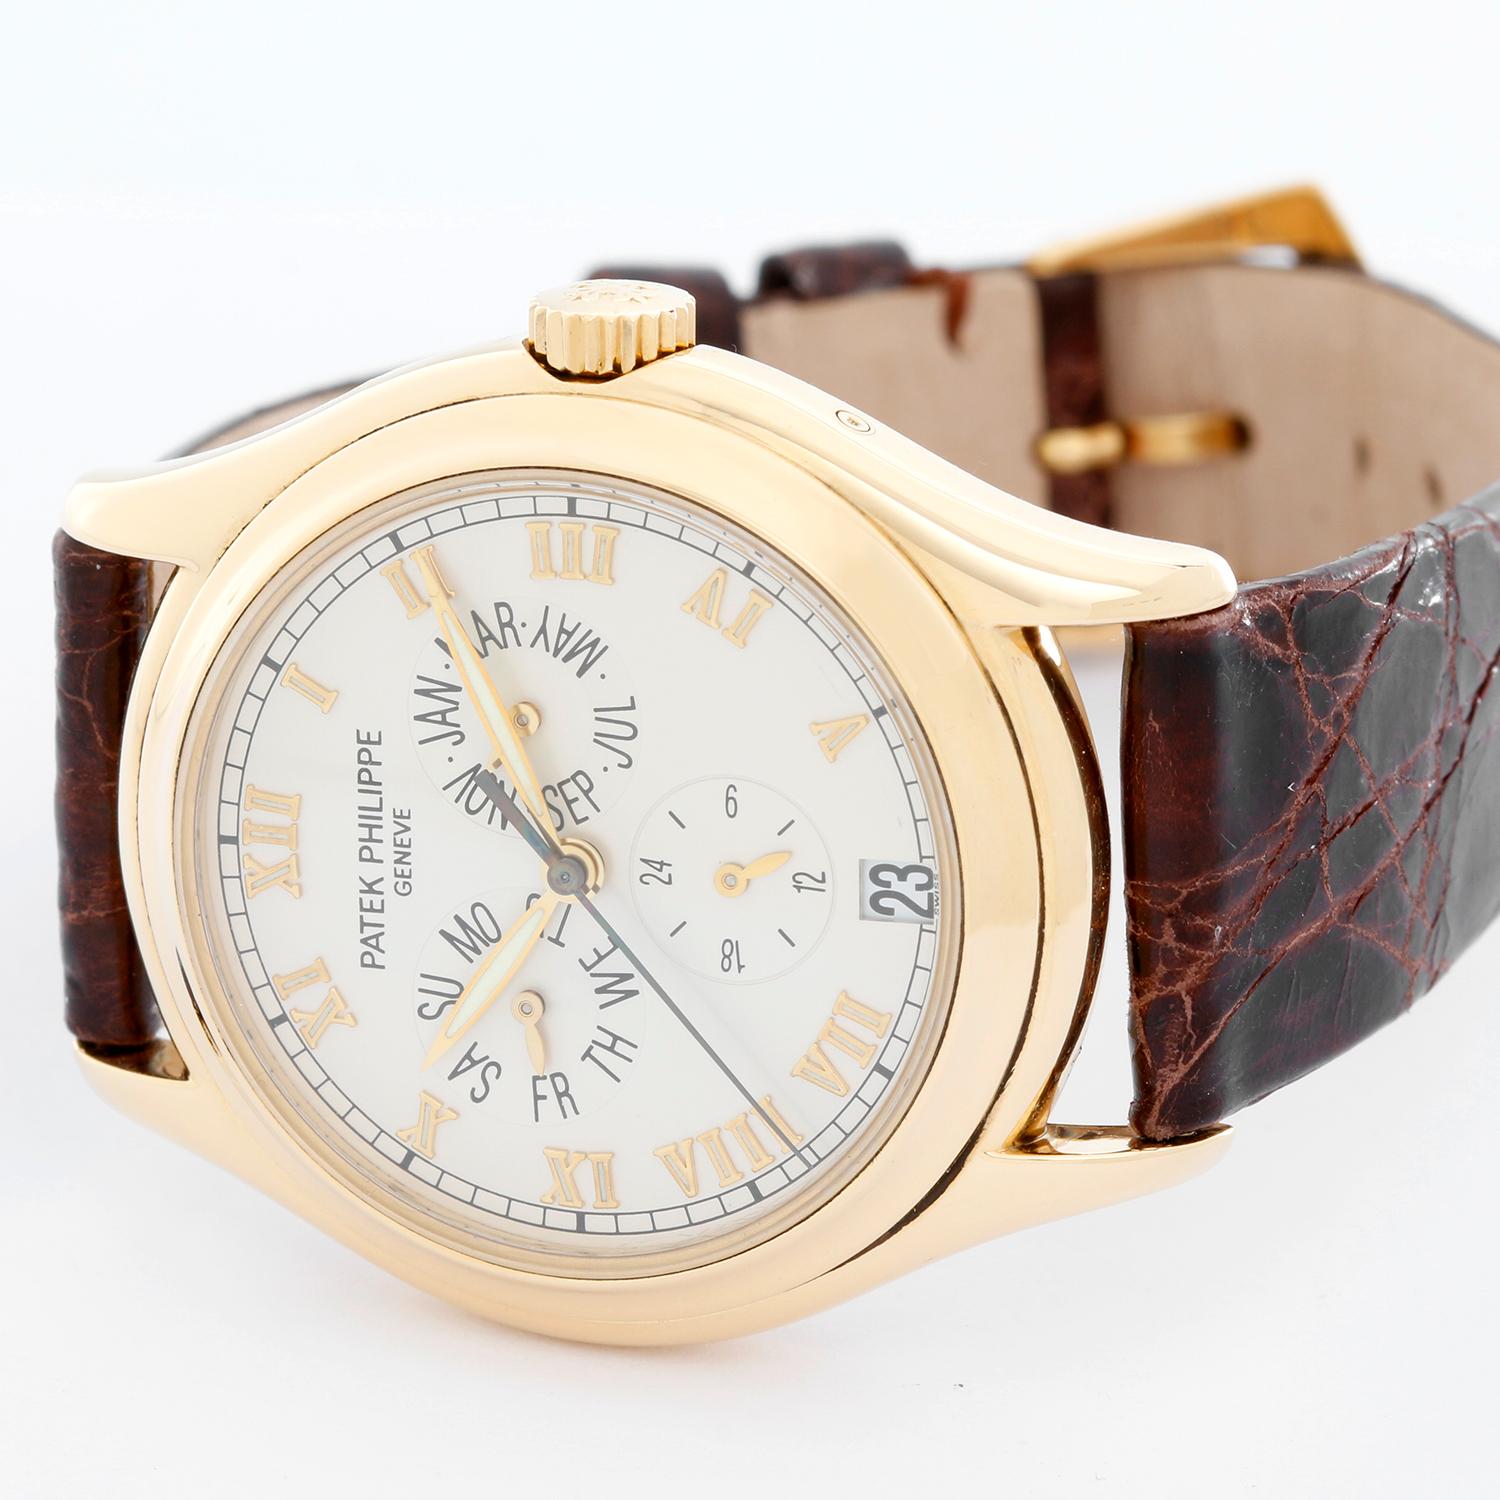 Patek Philippe Annular Calendar 18k Yellow Gold Men's Watch 5035 J (or 5035j) - Automatic winding. 18K yellow gold case with exposition back to view movement (37mm diameter). Silver dial with raised gold Roman numerals; triple calendar & 24 hour